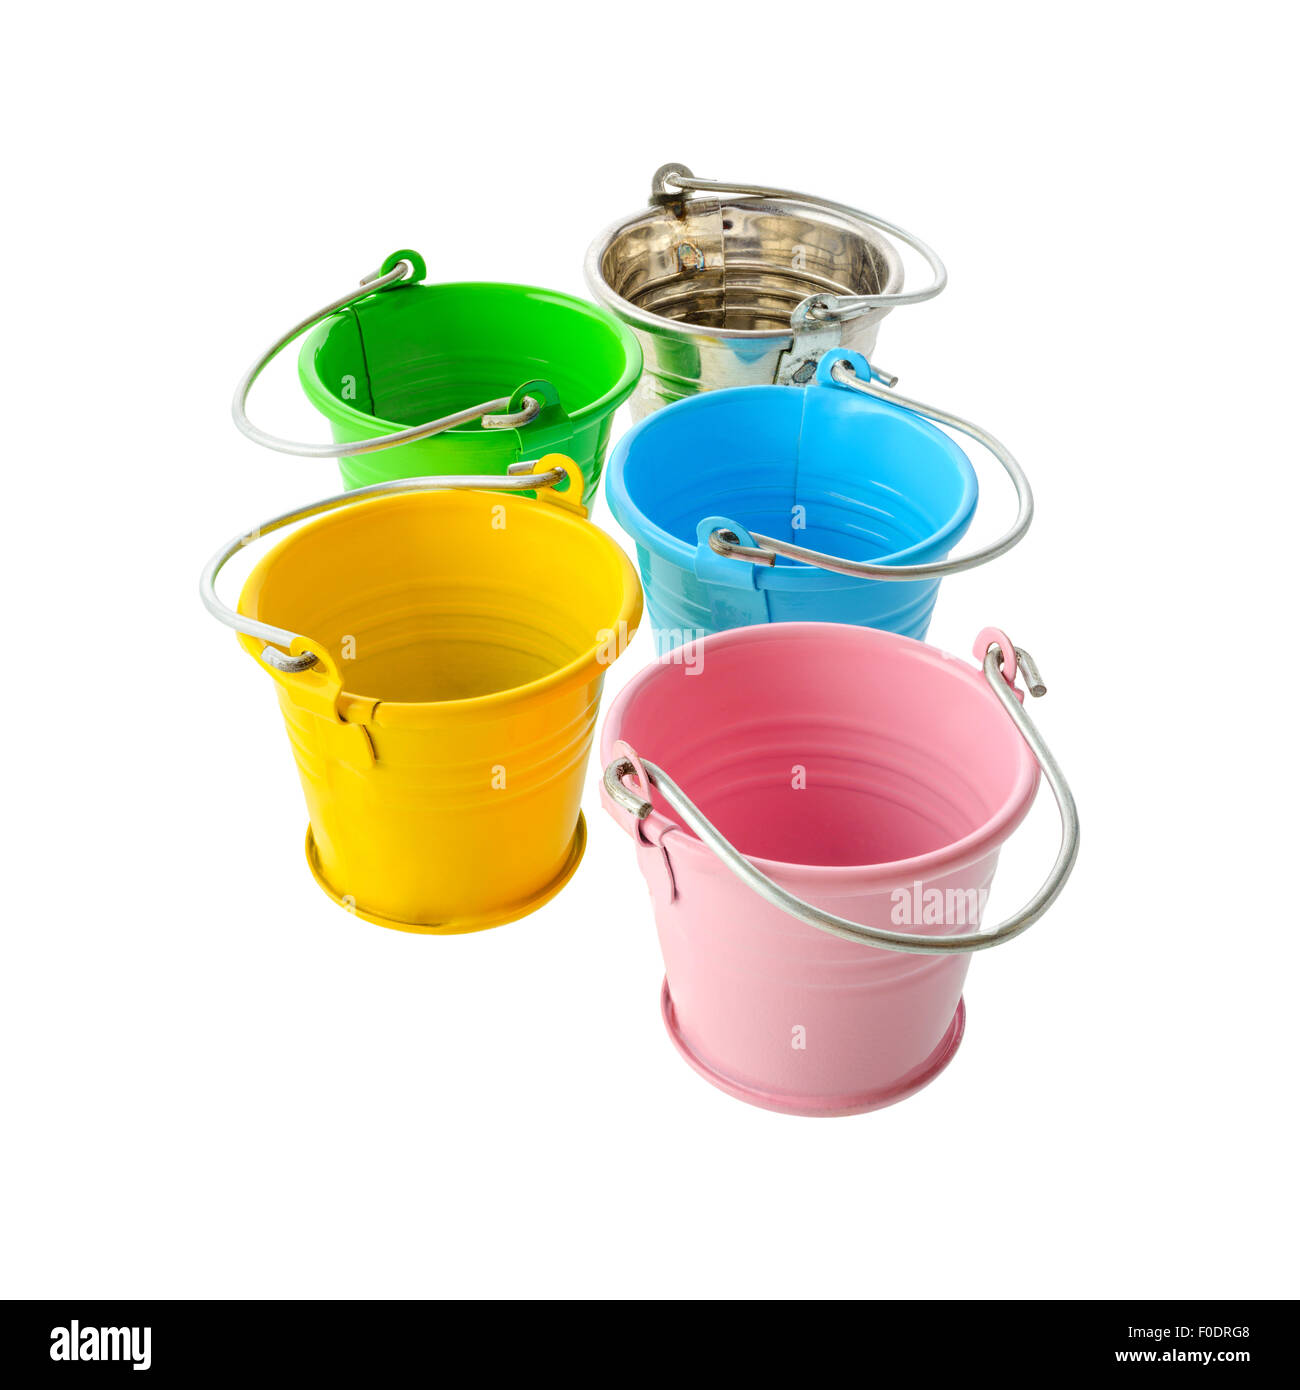 Household buckets Cut Out Stock Images & Pictures - Page 2 - Alamy